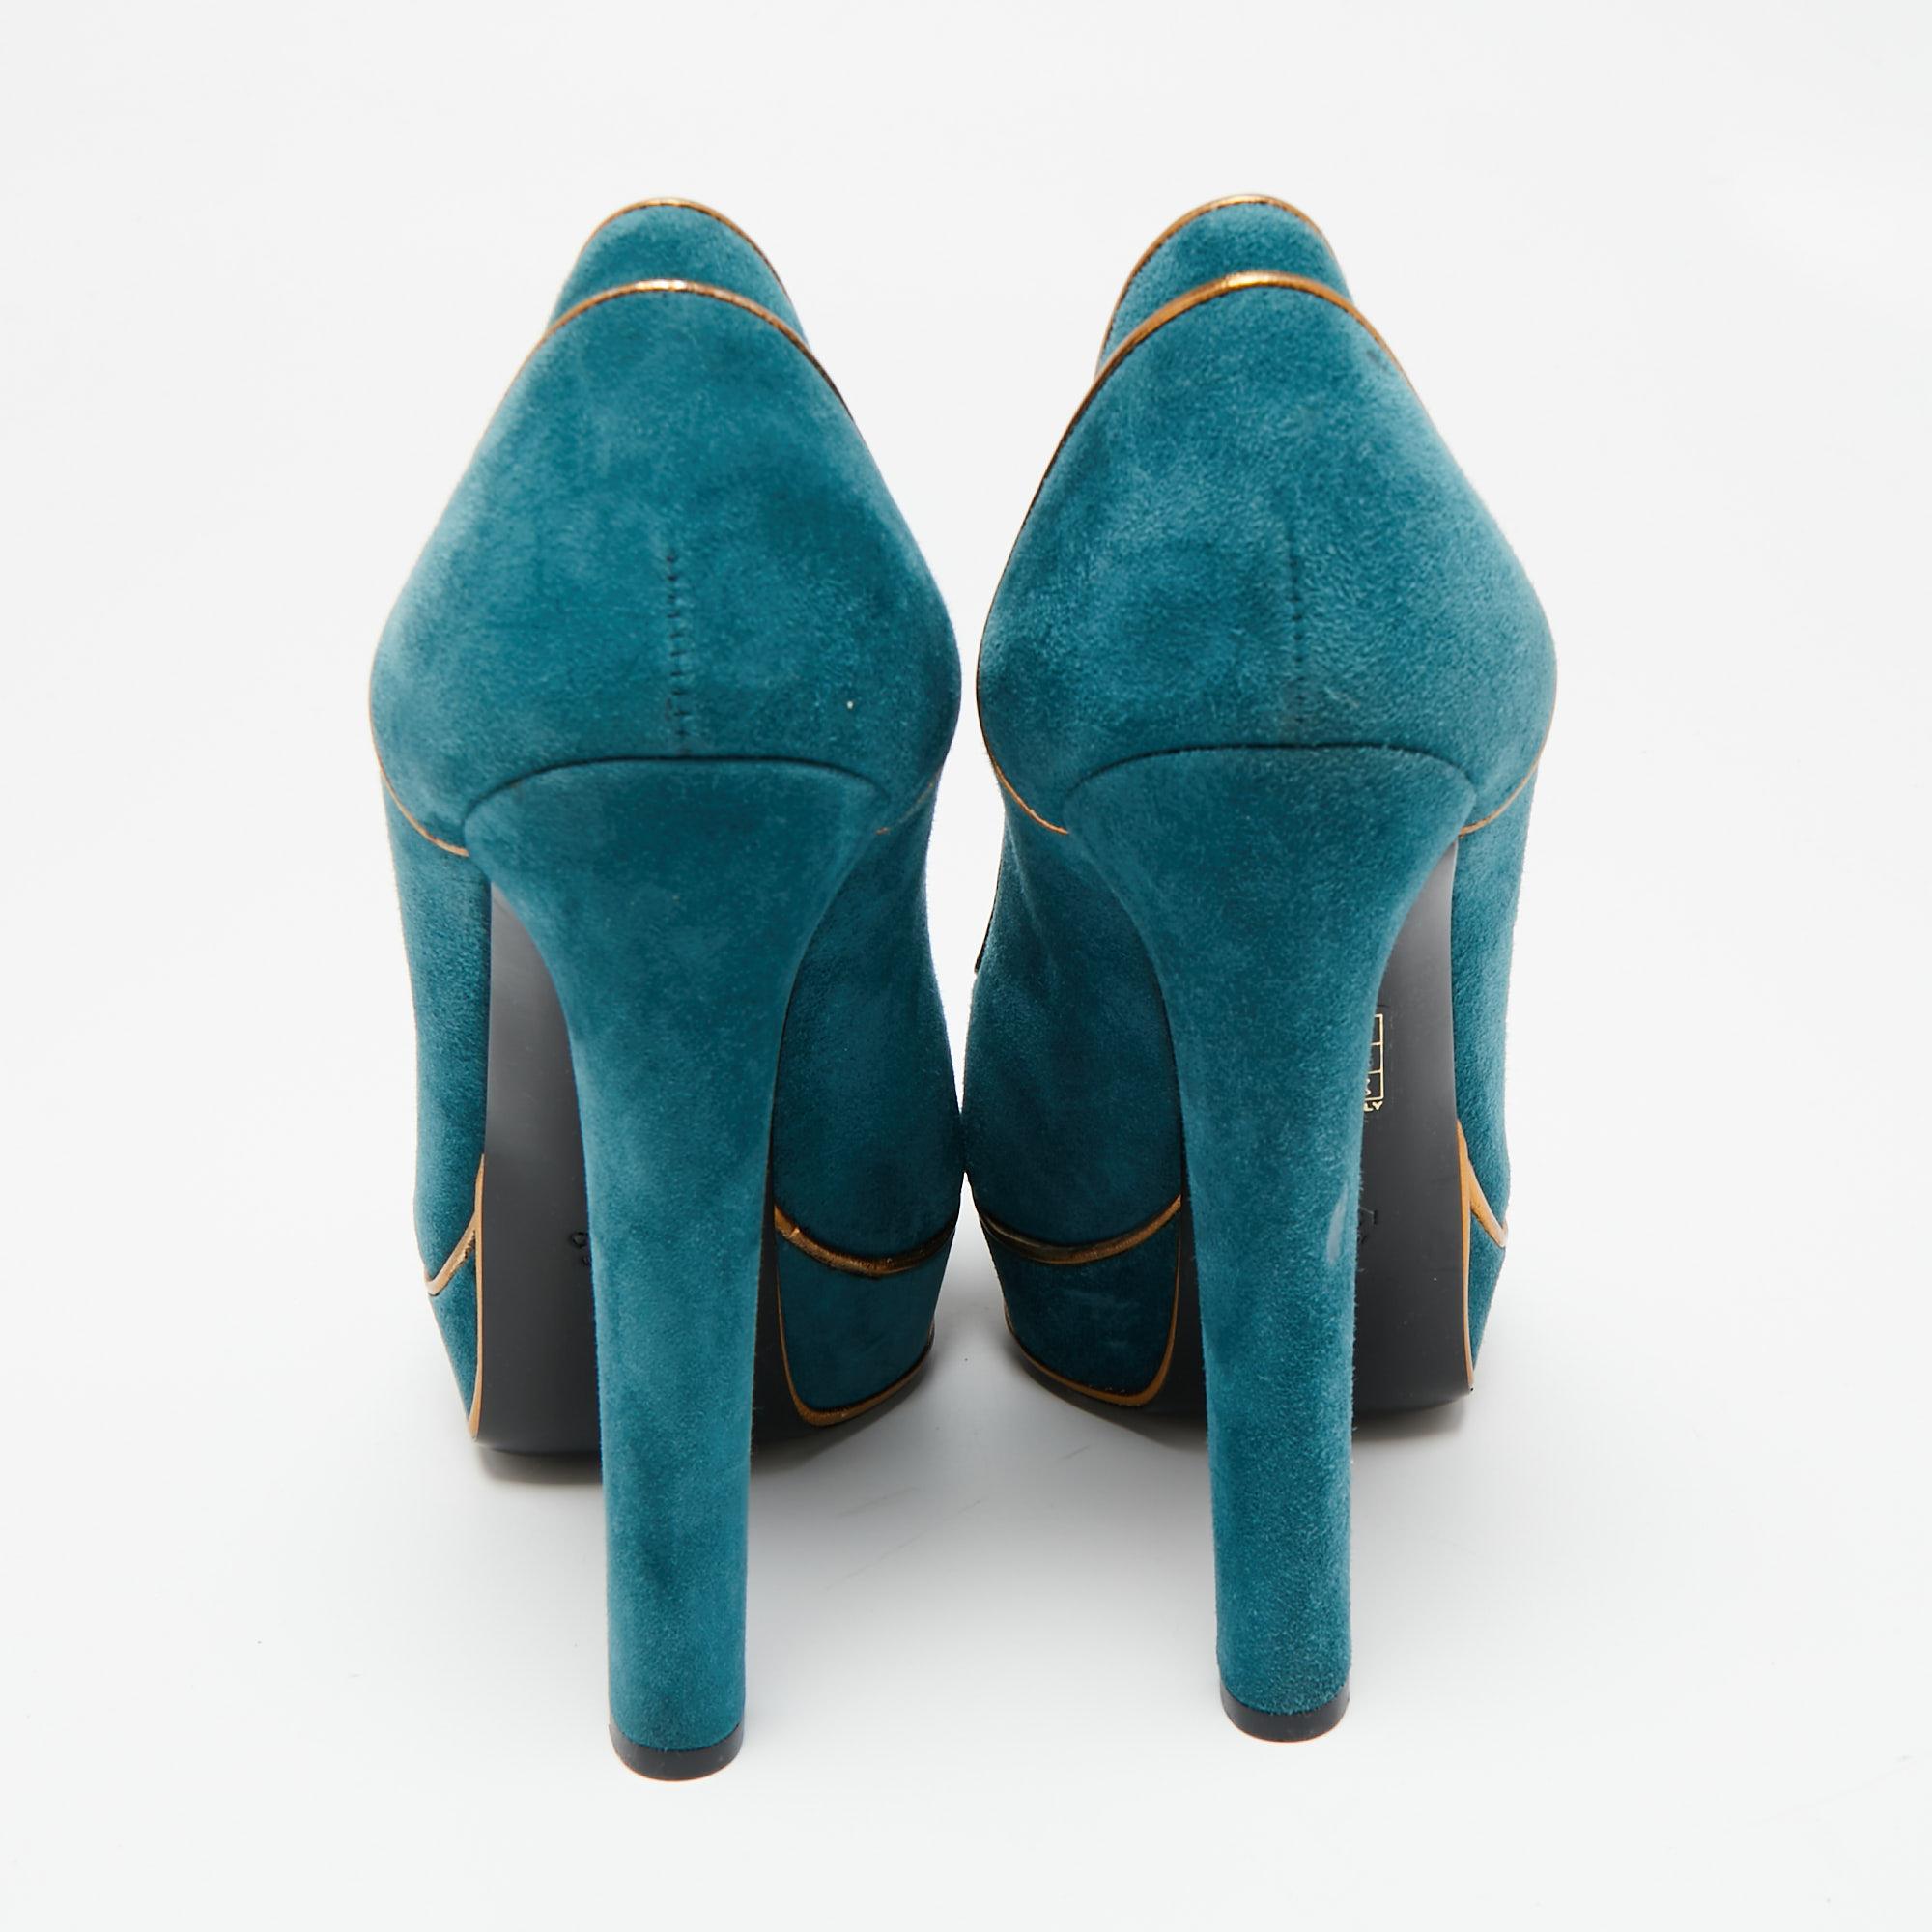 Blue Gucci Suede And Gold Leather Piping Detail Peep Toe Platform Pumps Size 39